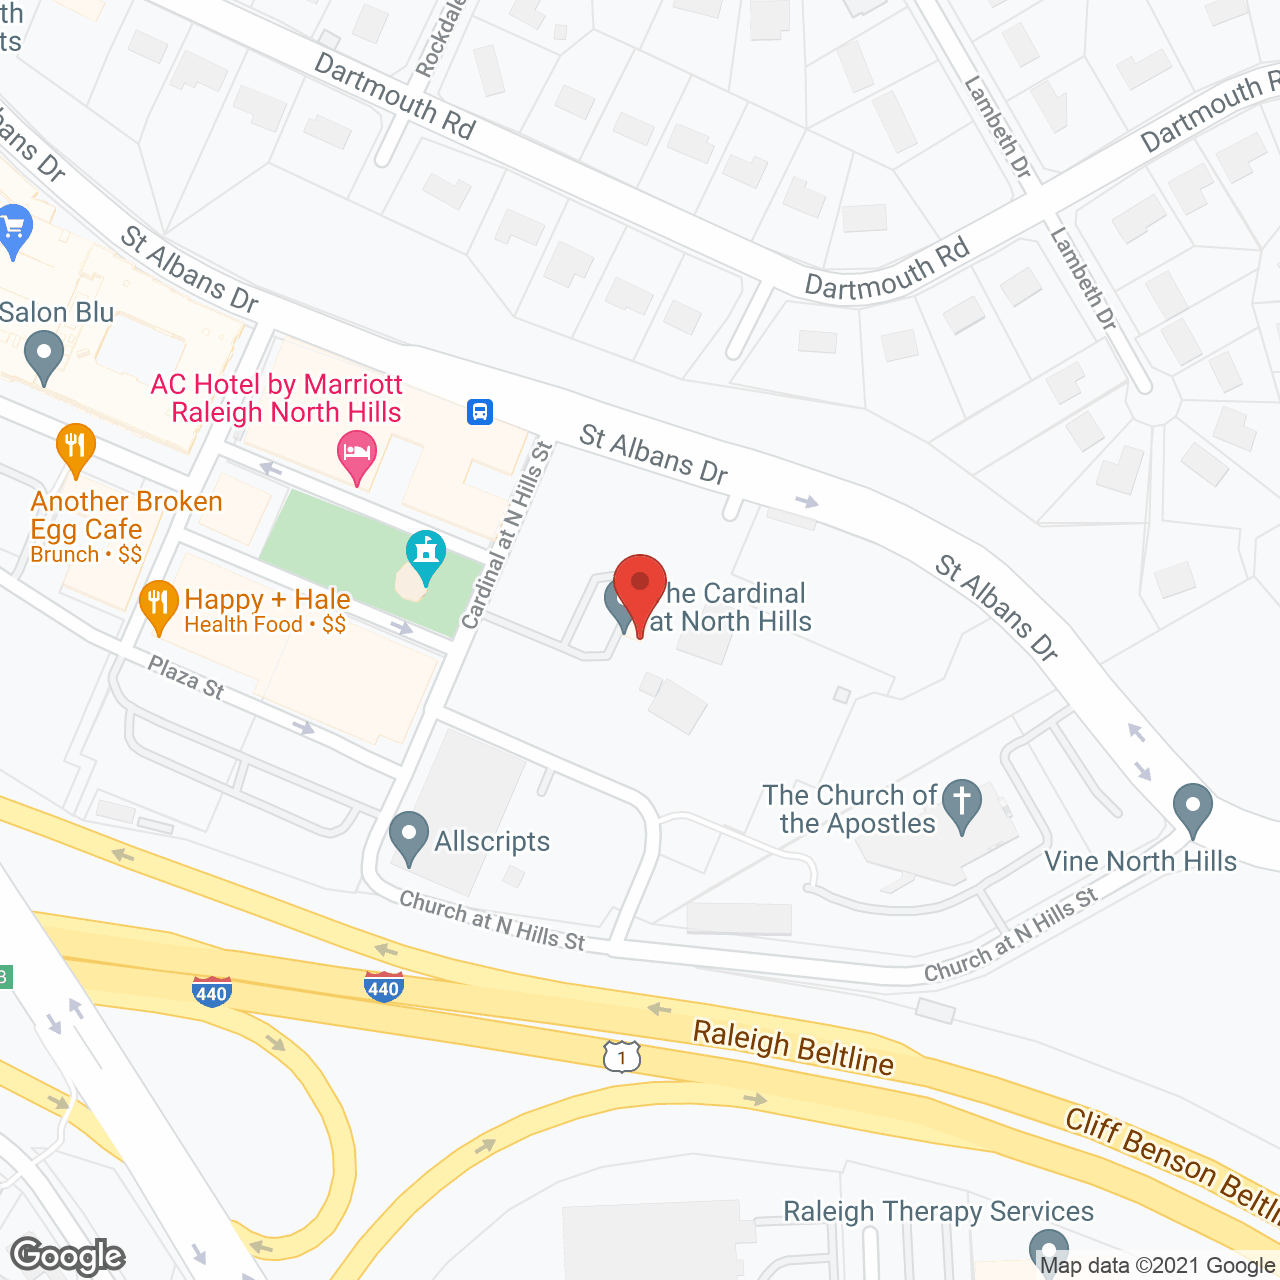 The Cardinal at North Hills in google map